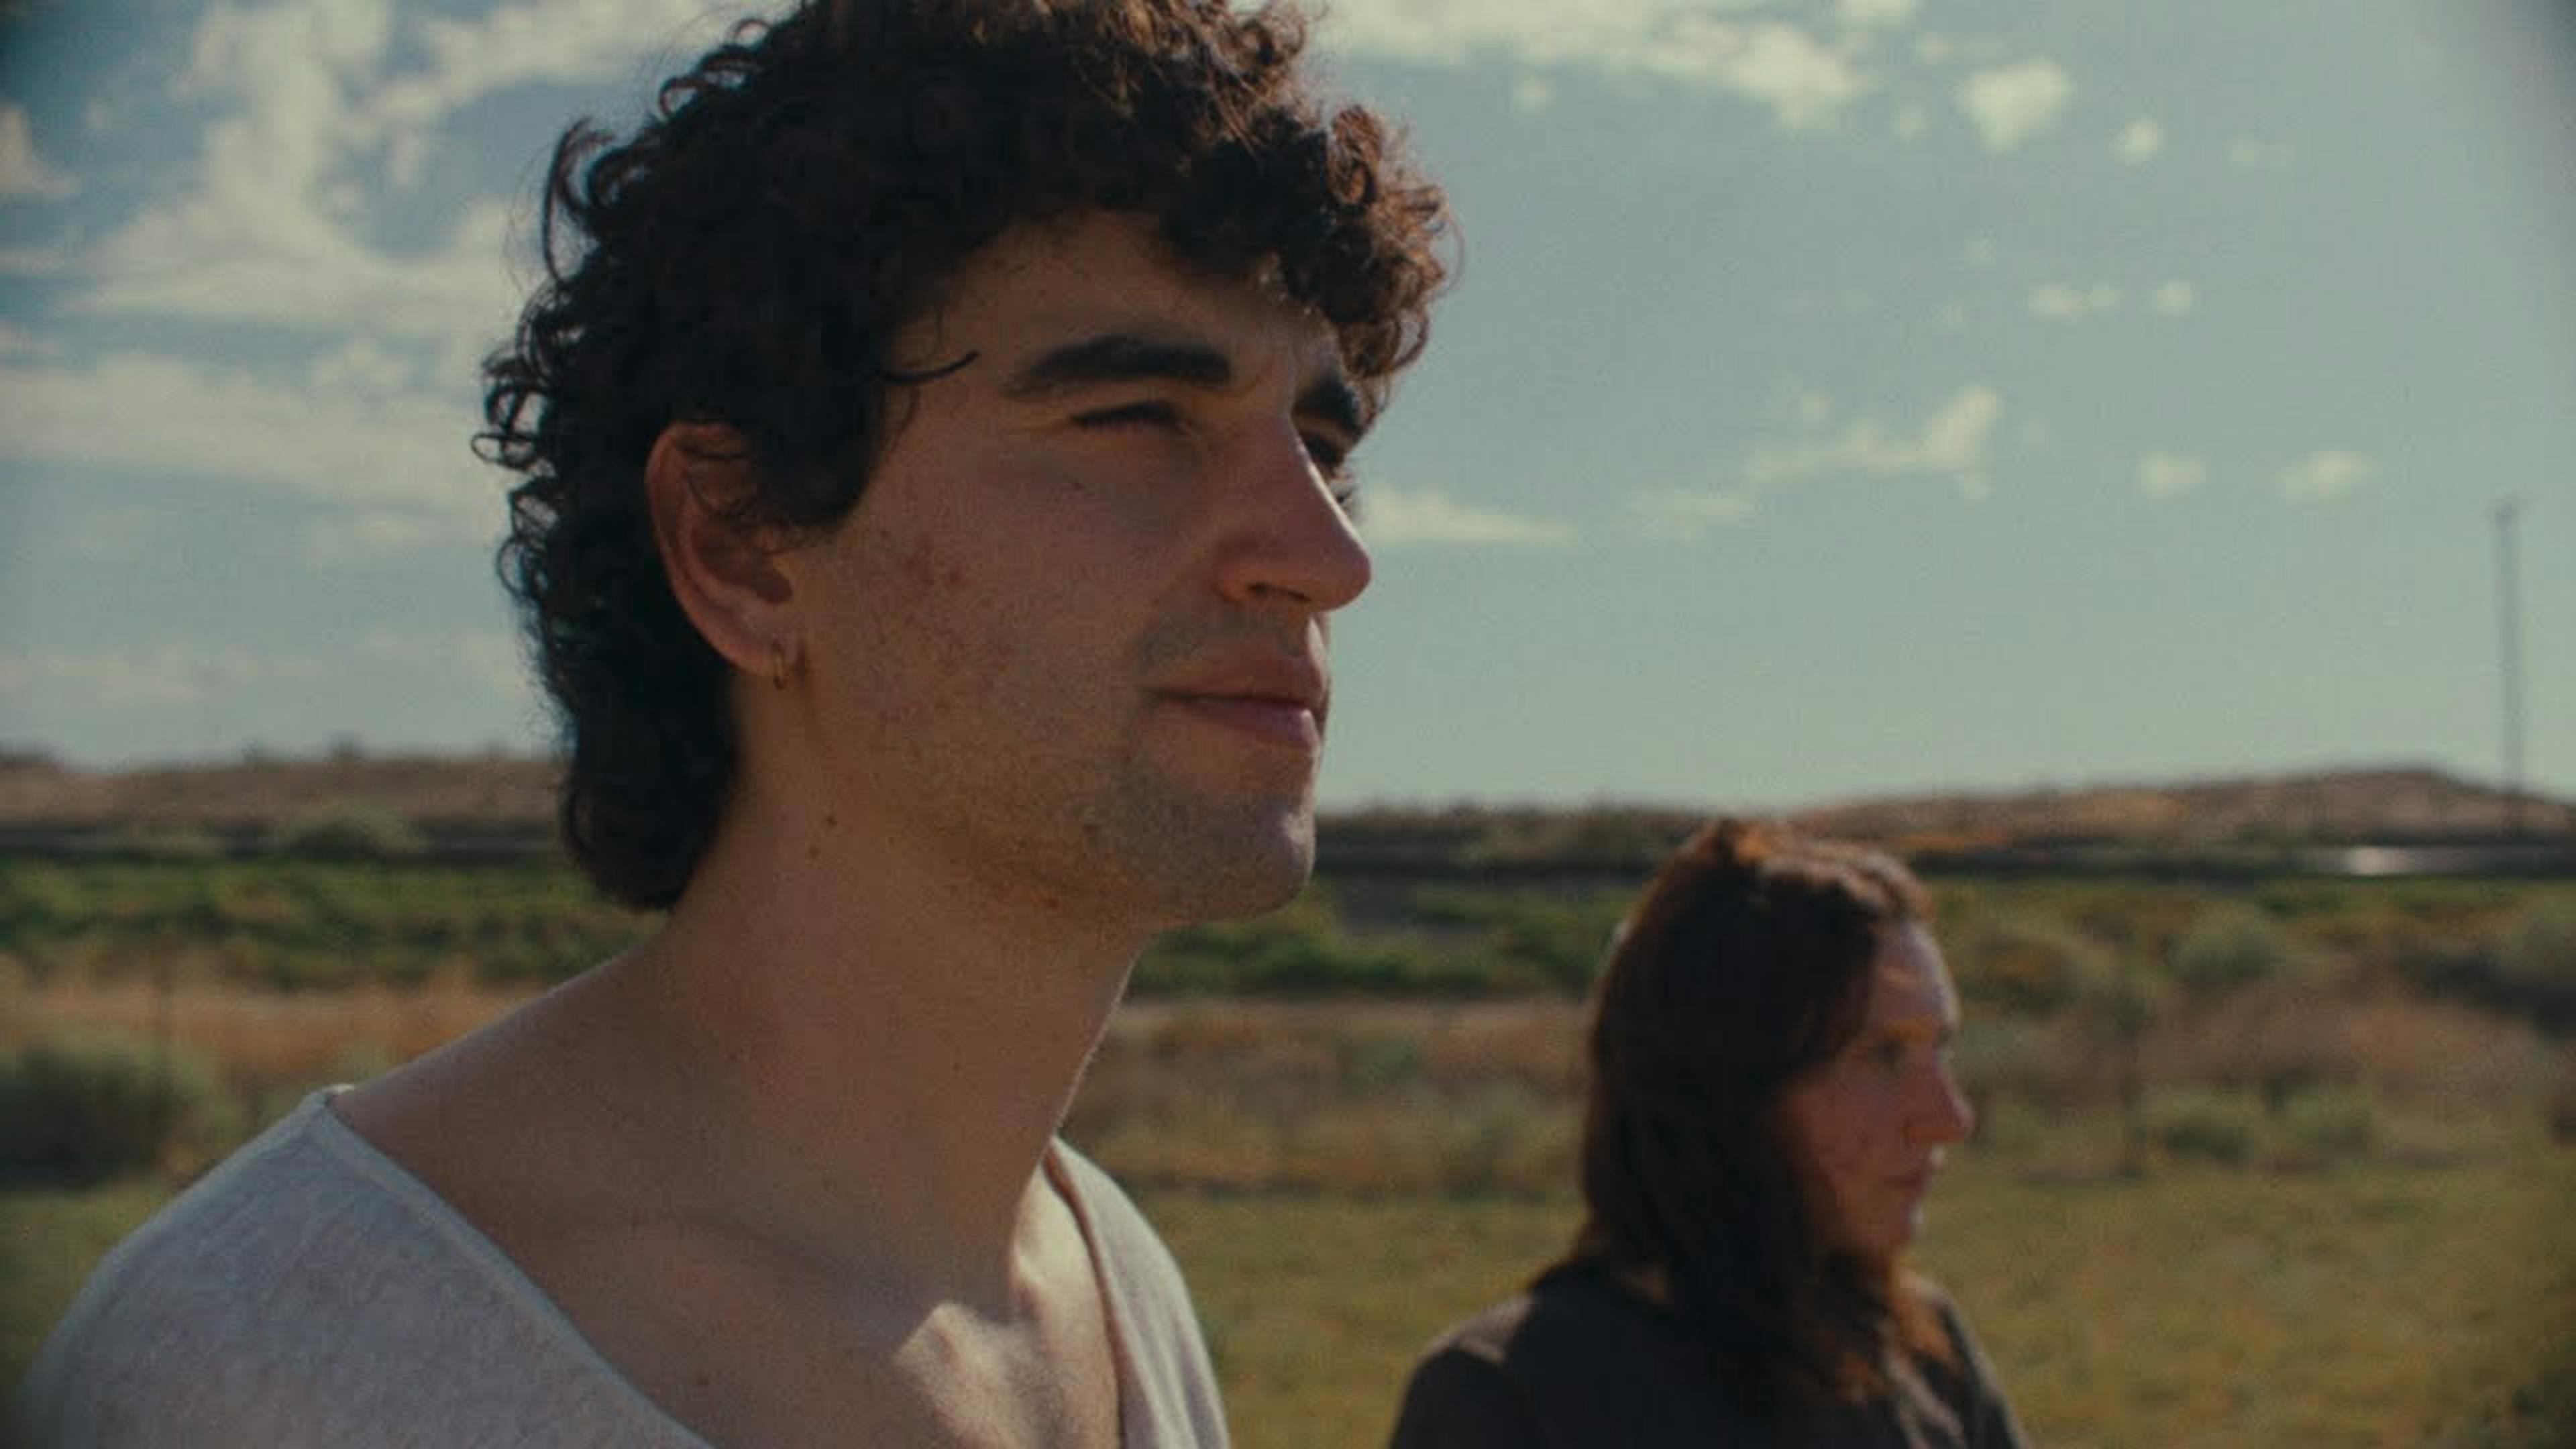 A still image from Carol Ades's music video 'Crying During Sex' captures a candid moment of two individuals outdoors. In the foreground, there's a man with curly dark hair, a slight stubble on his face, wearing a white, low-cut sleeveless top, gazing into the distance with a contemplative expression. Behind him and slightly out of focus, there is a woman with long, straight, brown hair, dressed in a black shirt, looking down thoughtfully. They are set against a serene backdrop of a clear blue sky and sparse vegetation in a dry, open field, evoking a sense of quiet introspection.